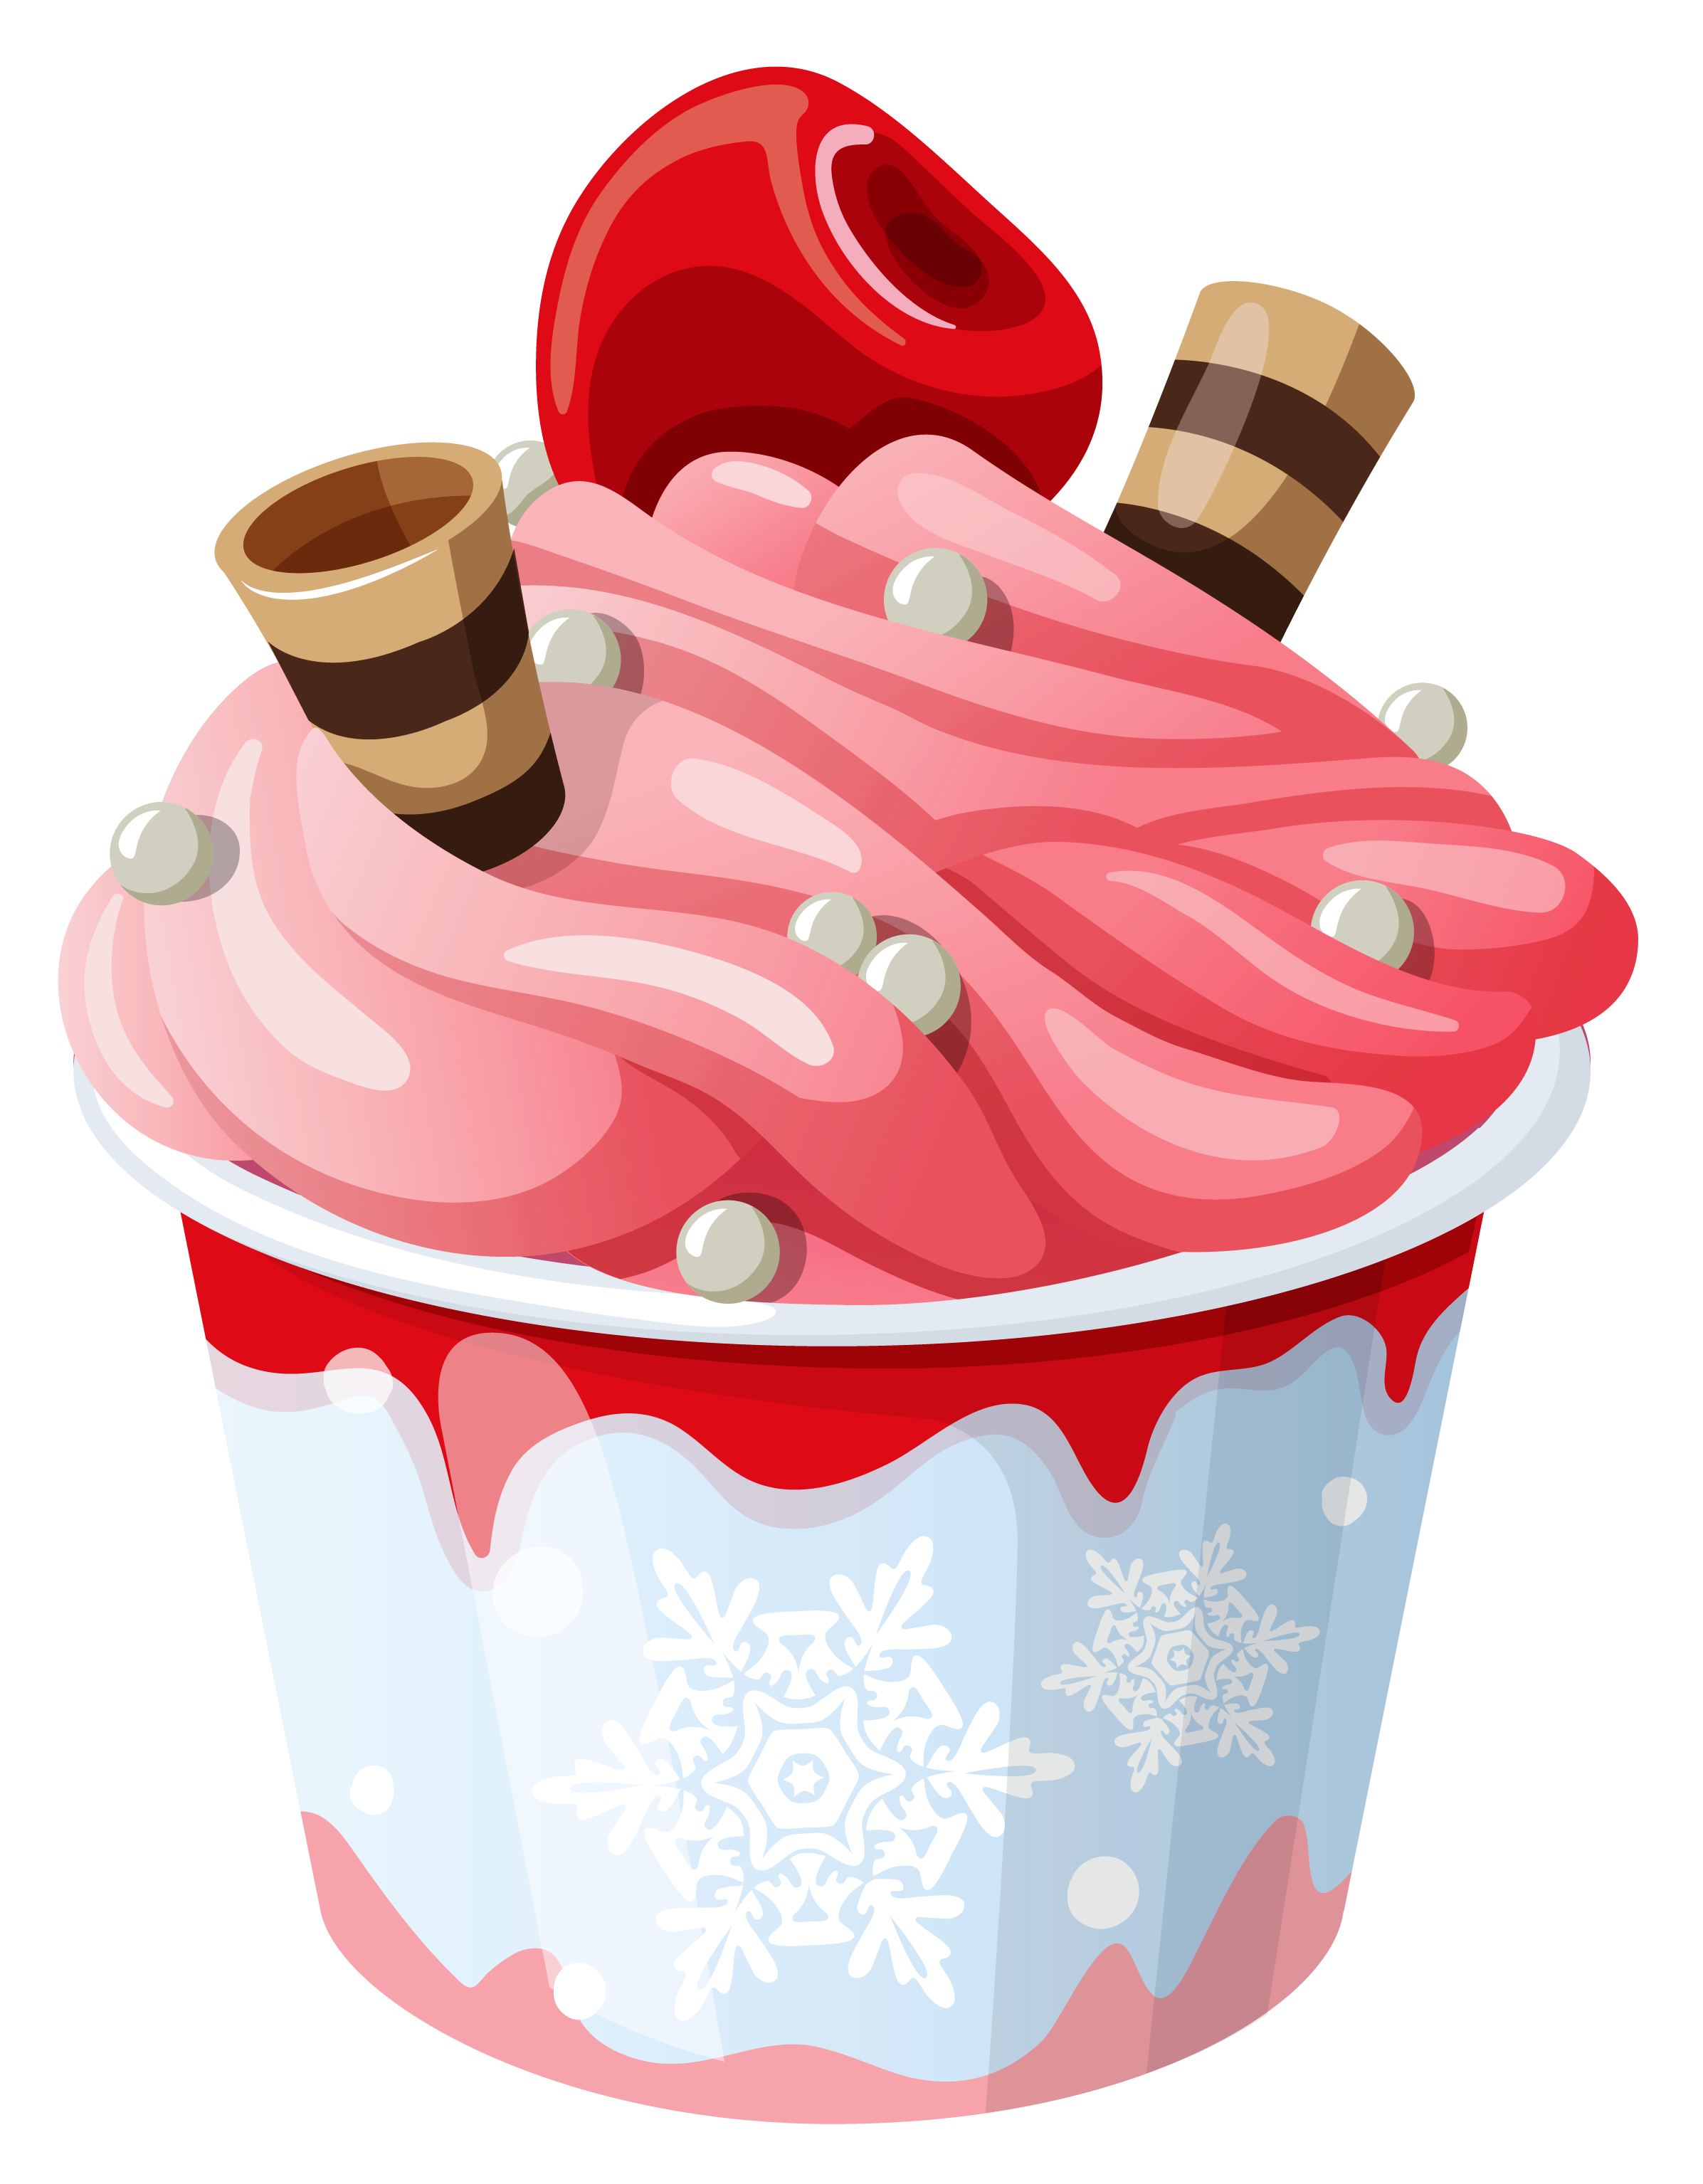 Ice cream cup png. Sundae clipart sweet